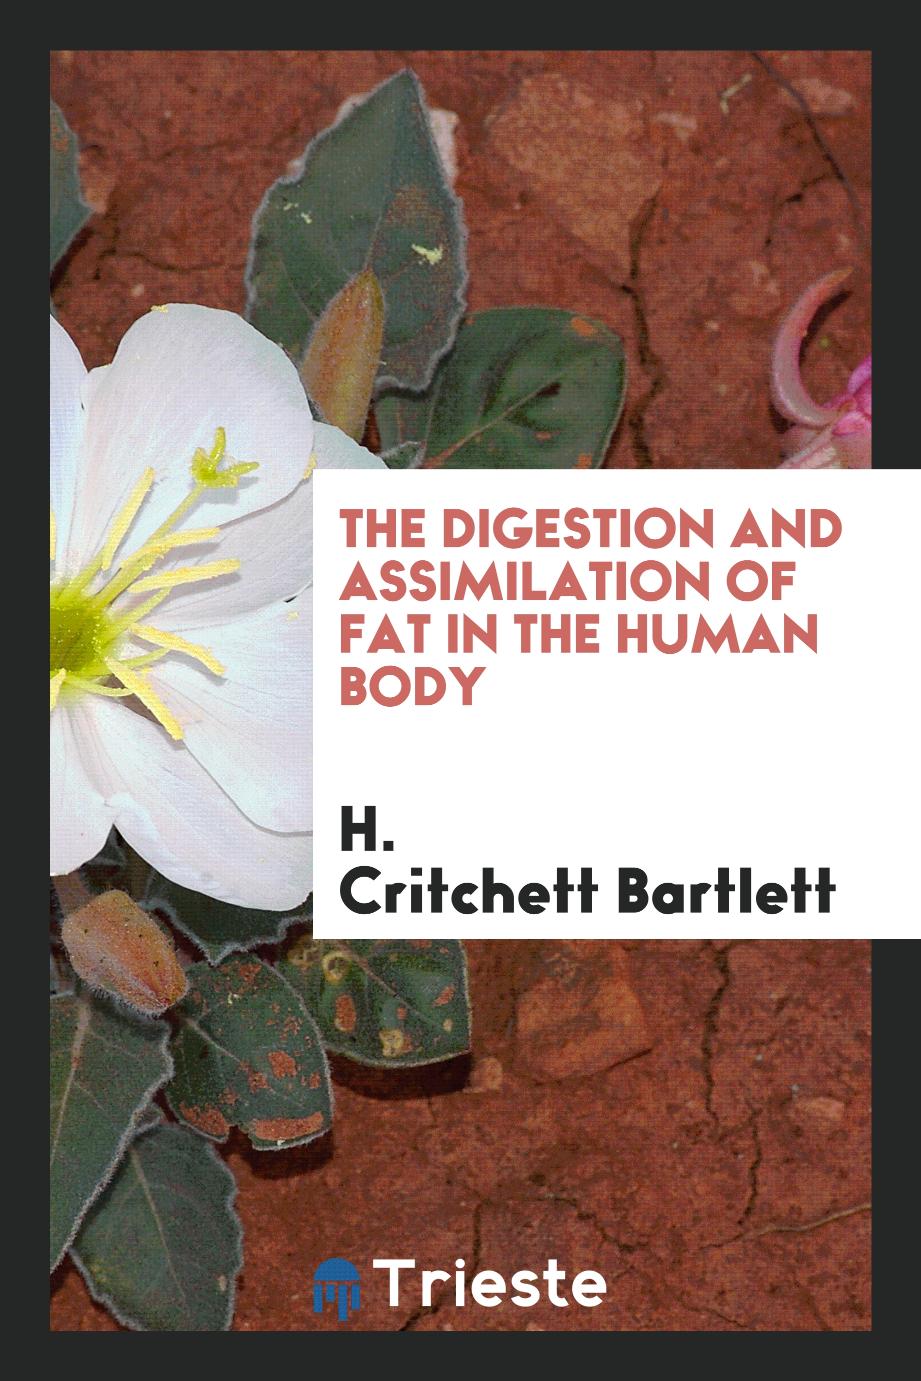 The digestion and assimilation of fat in the human body